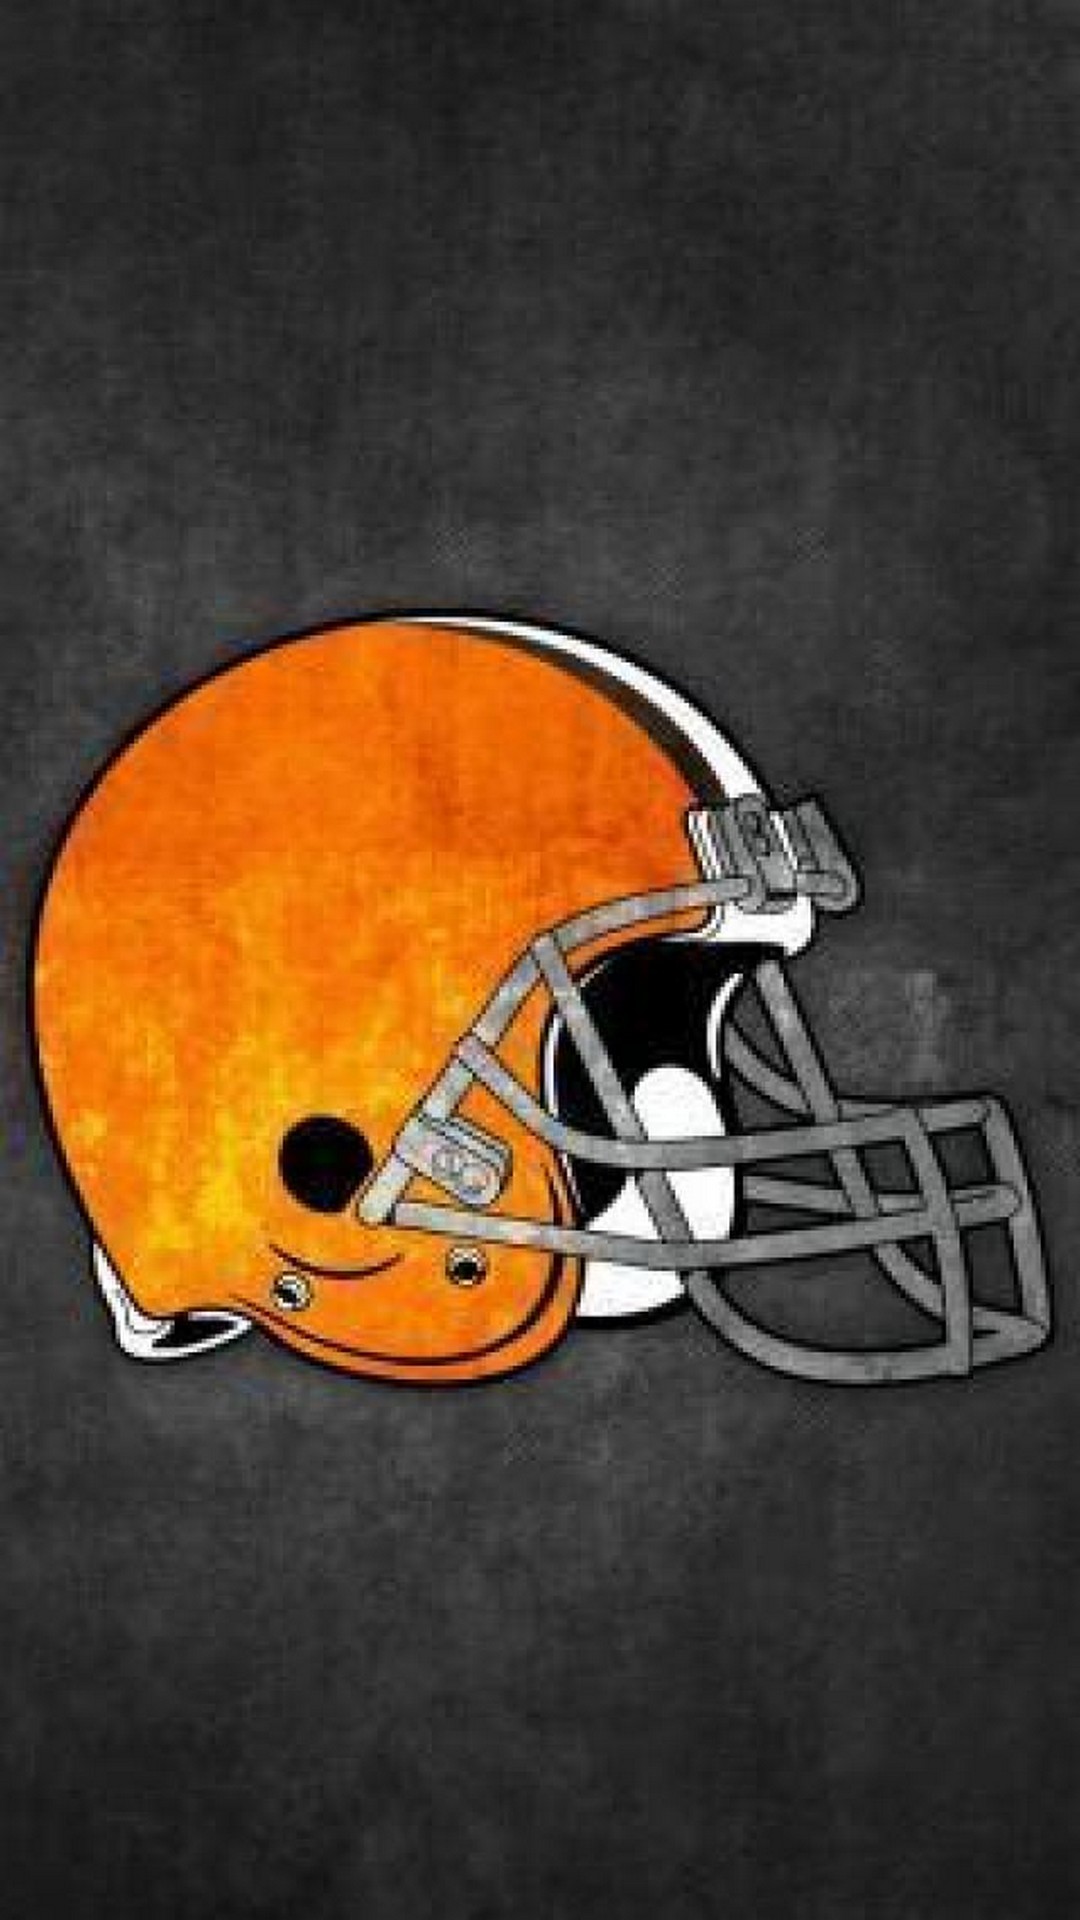 Cleveland Browns iPhone Wallpaper HD With high-resolution 1080X1920 pixel. Download and set as wallpaper for Apple iPhone X, XS Max, XR, 8, 7, 6, SE, iPad, Android